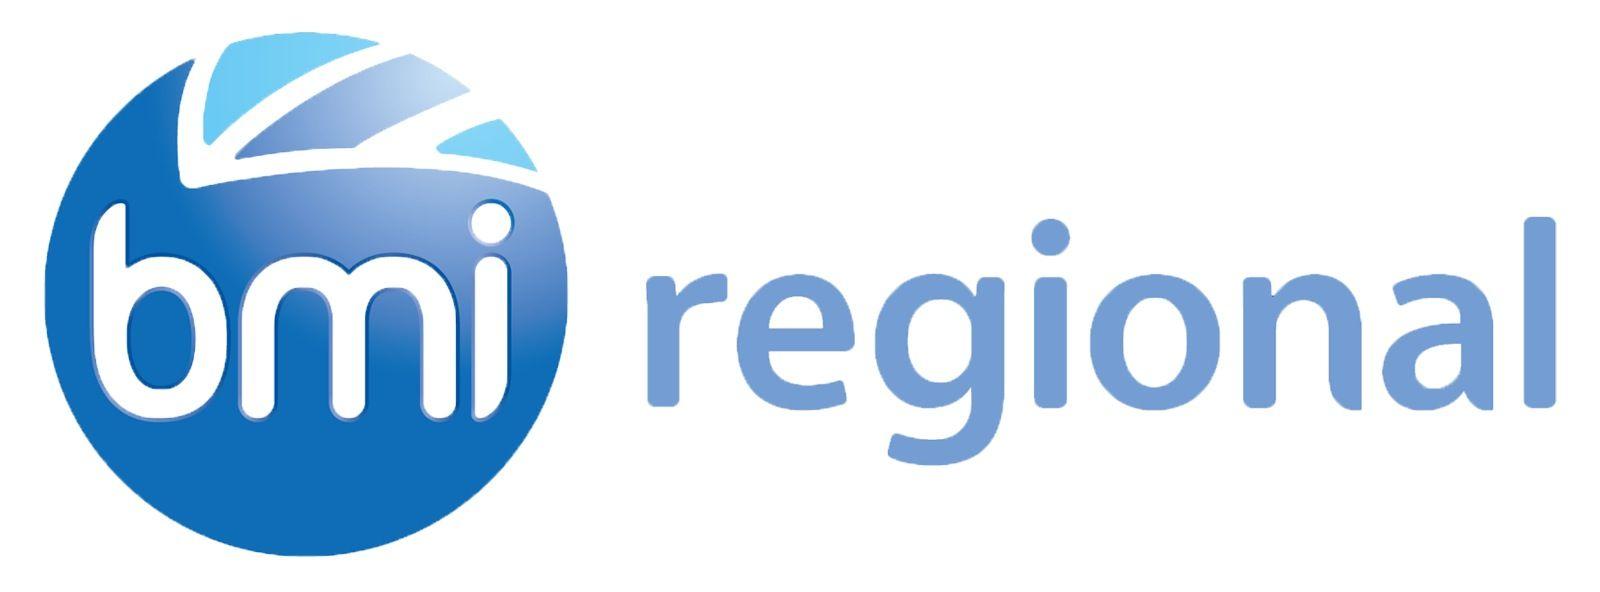 BMI Logo - 6 Real Reviews about BMI Regional BM - What The Flight